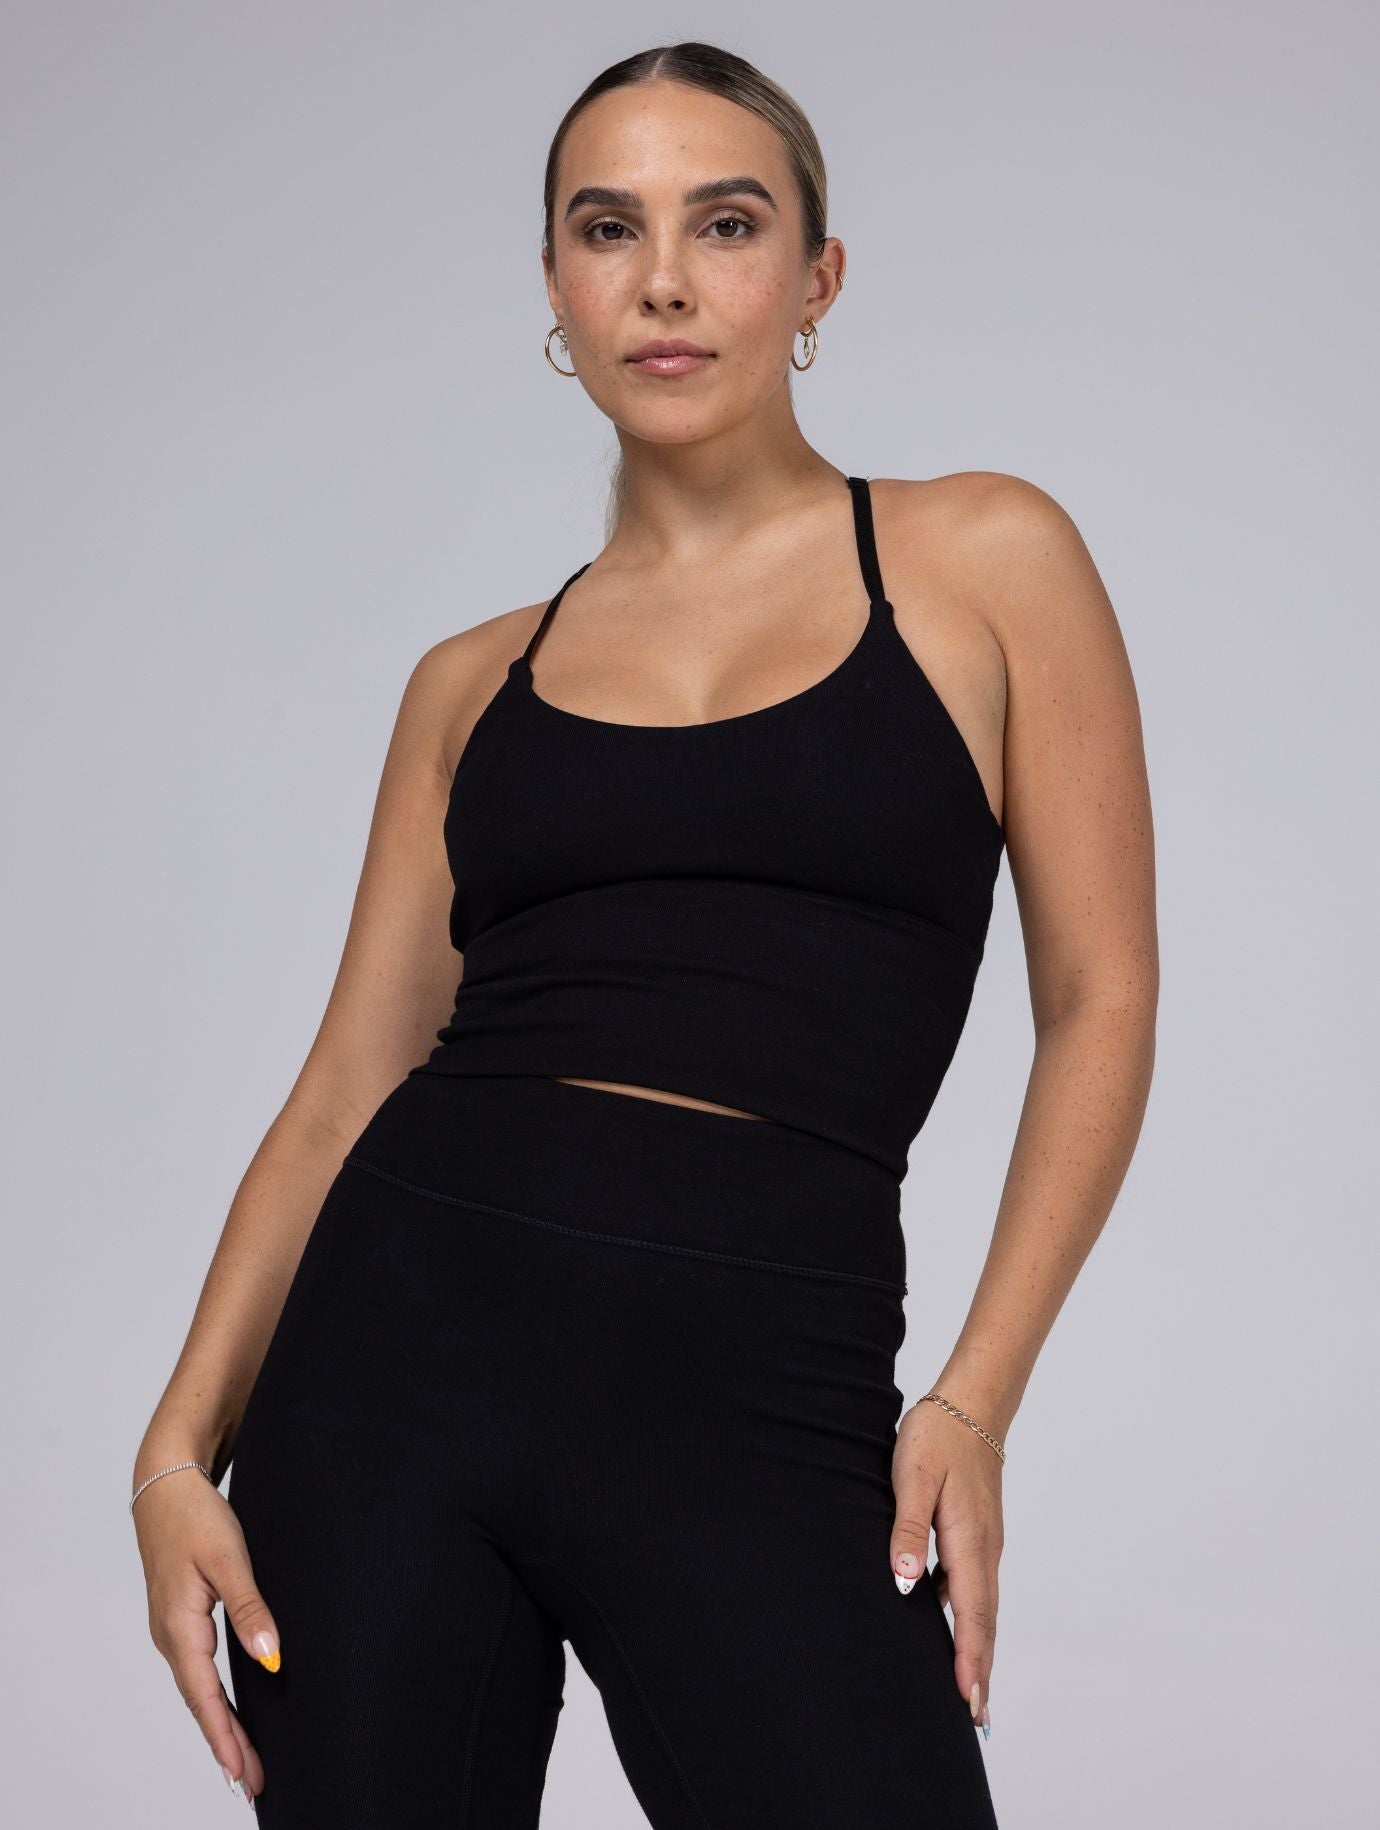 BRABAR  The Longline Cami bra is made for comfort and fashion